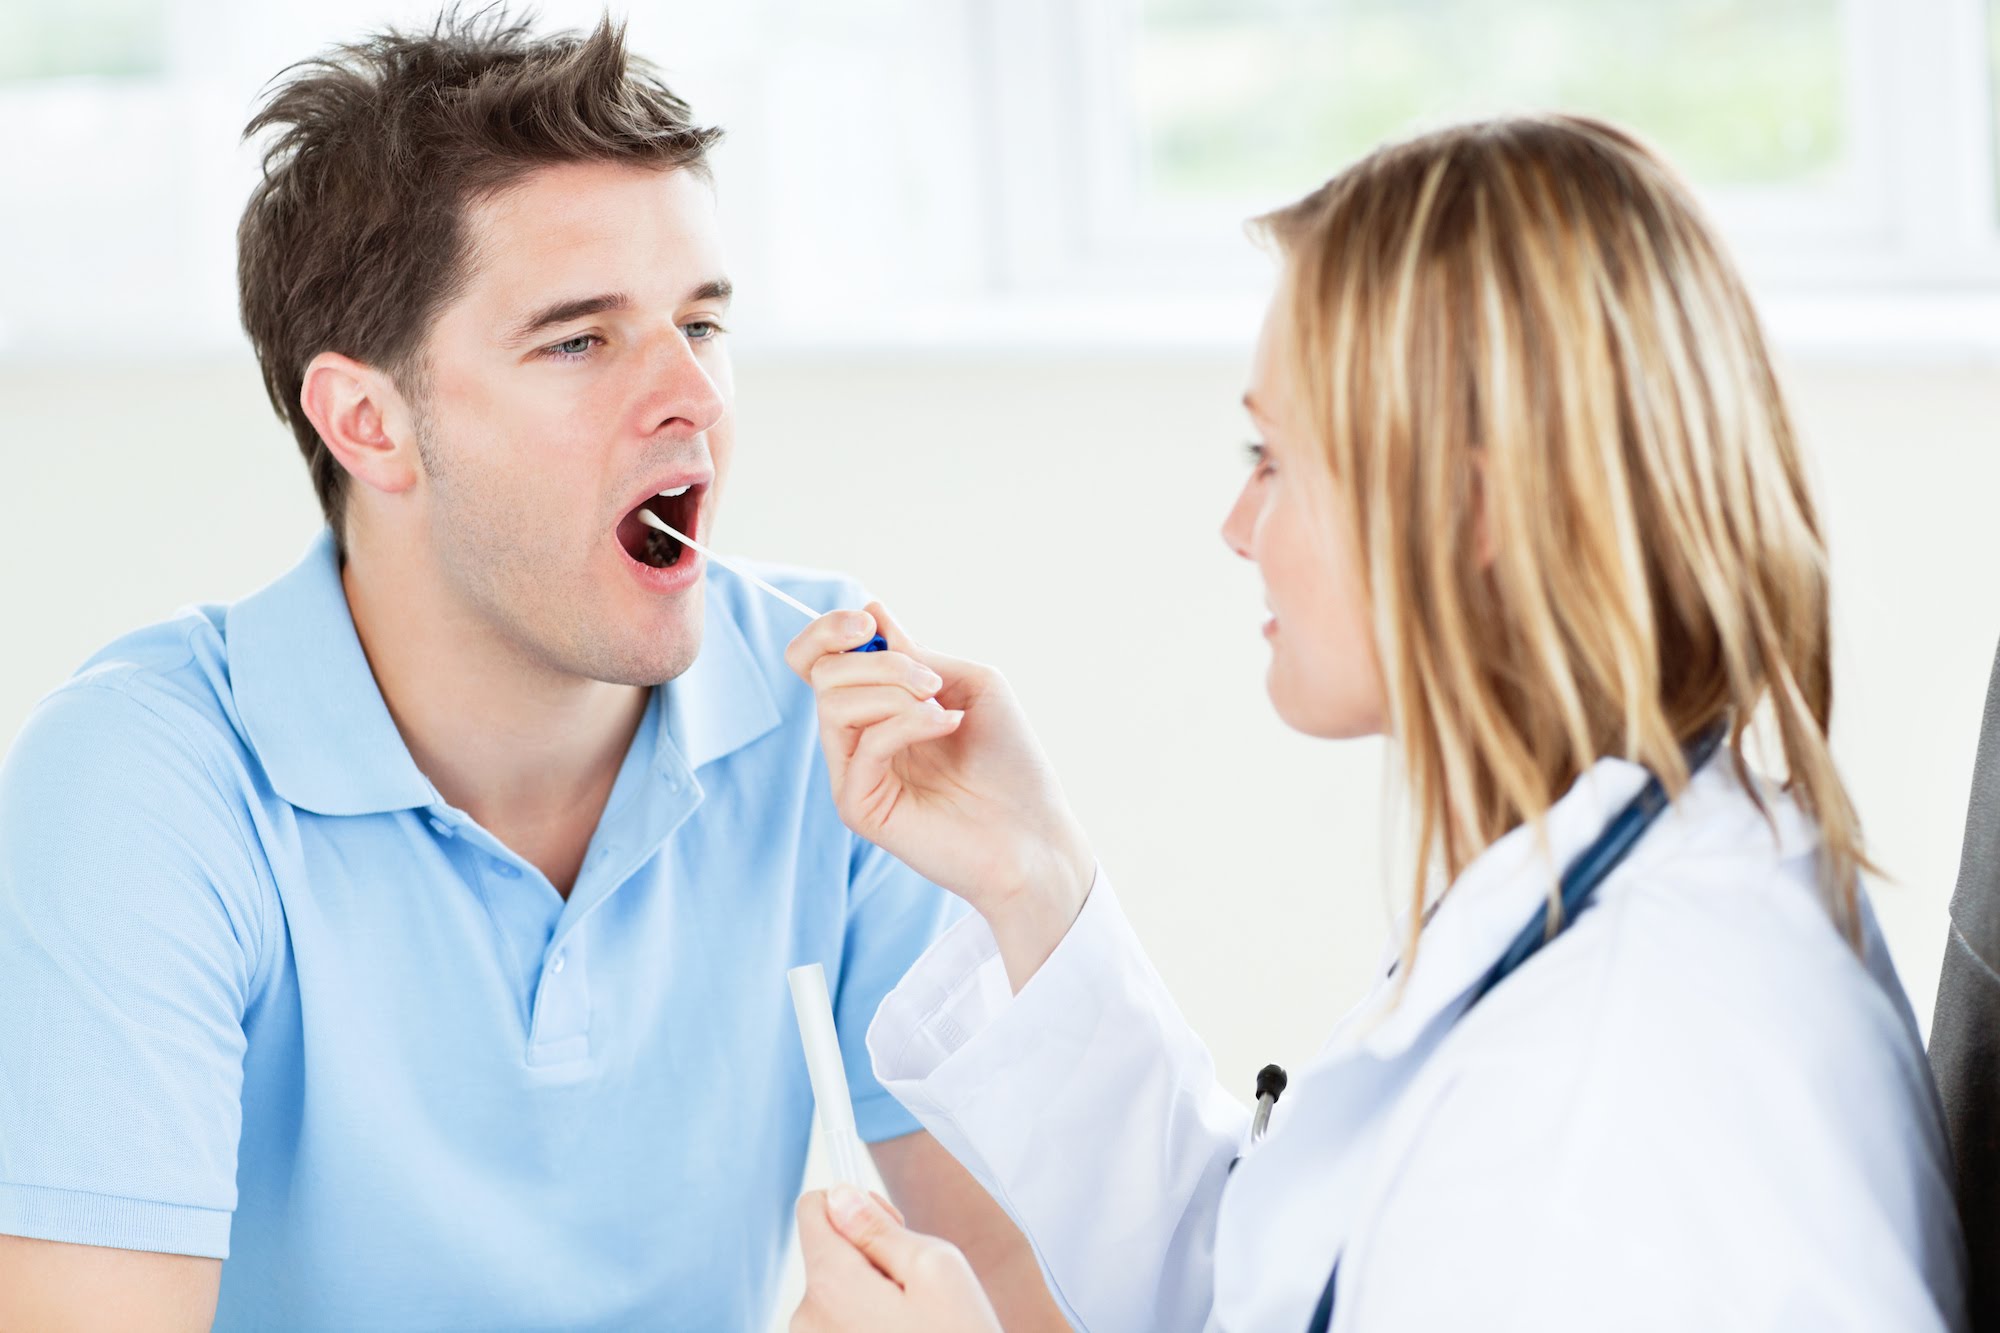 How to tell if you have bad breath